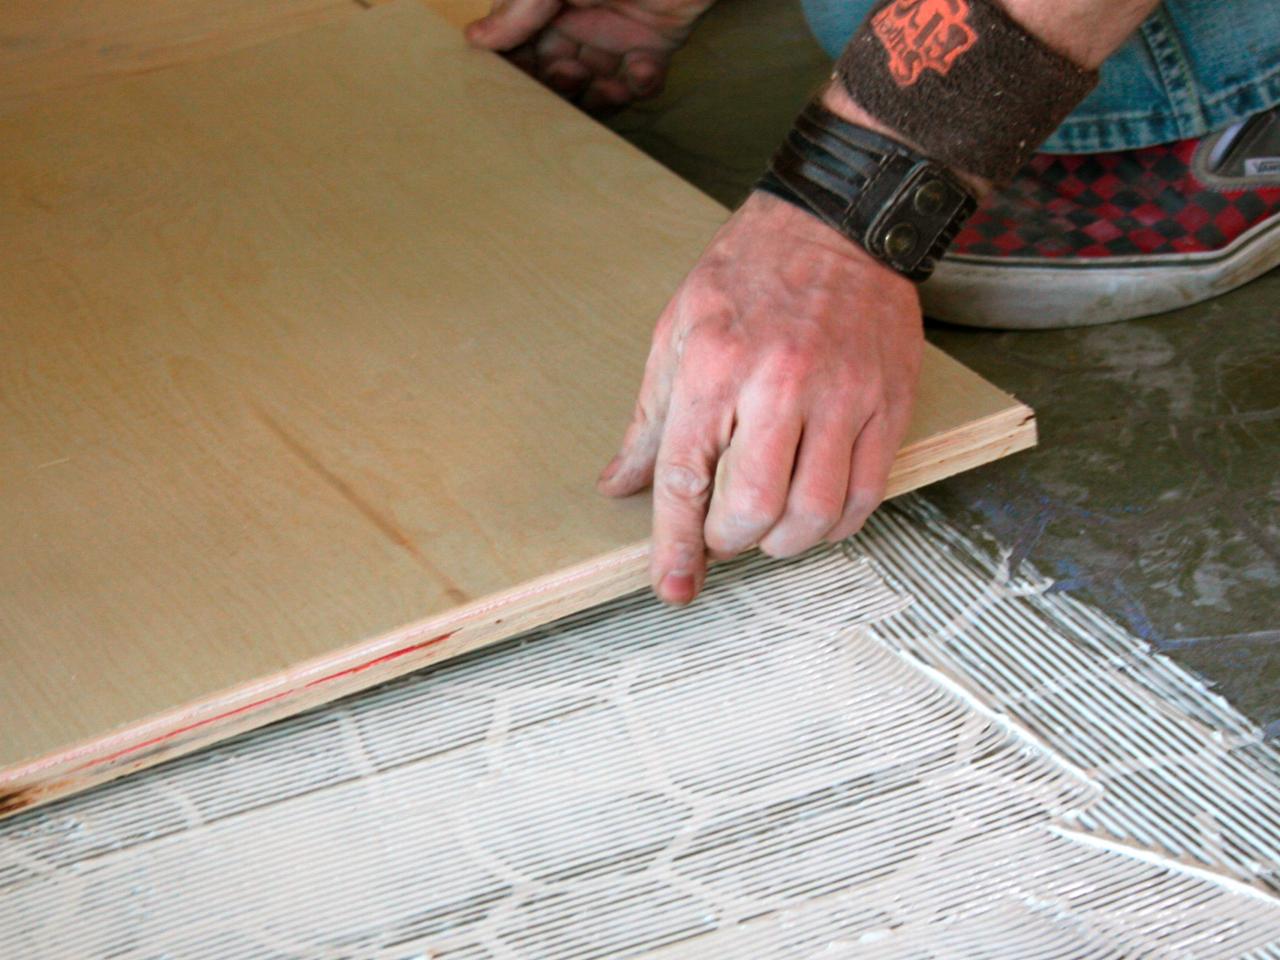 How to Install Plywood Floor Tiles | HGTV